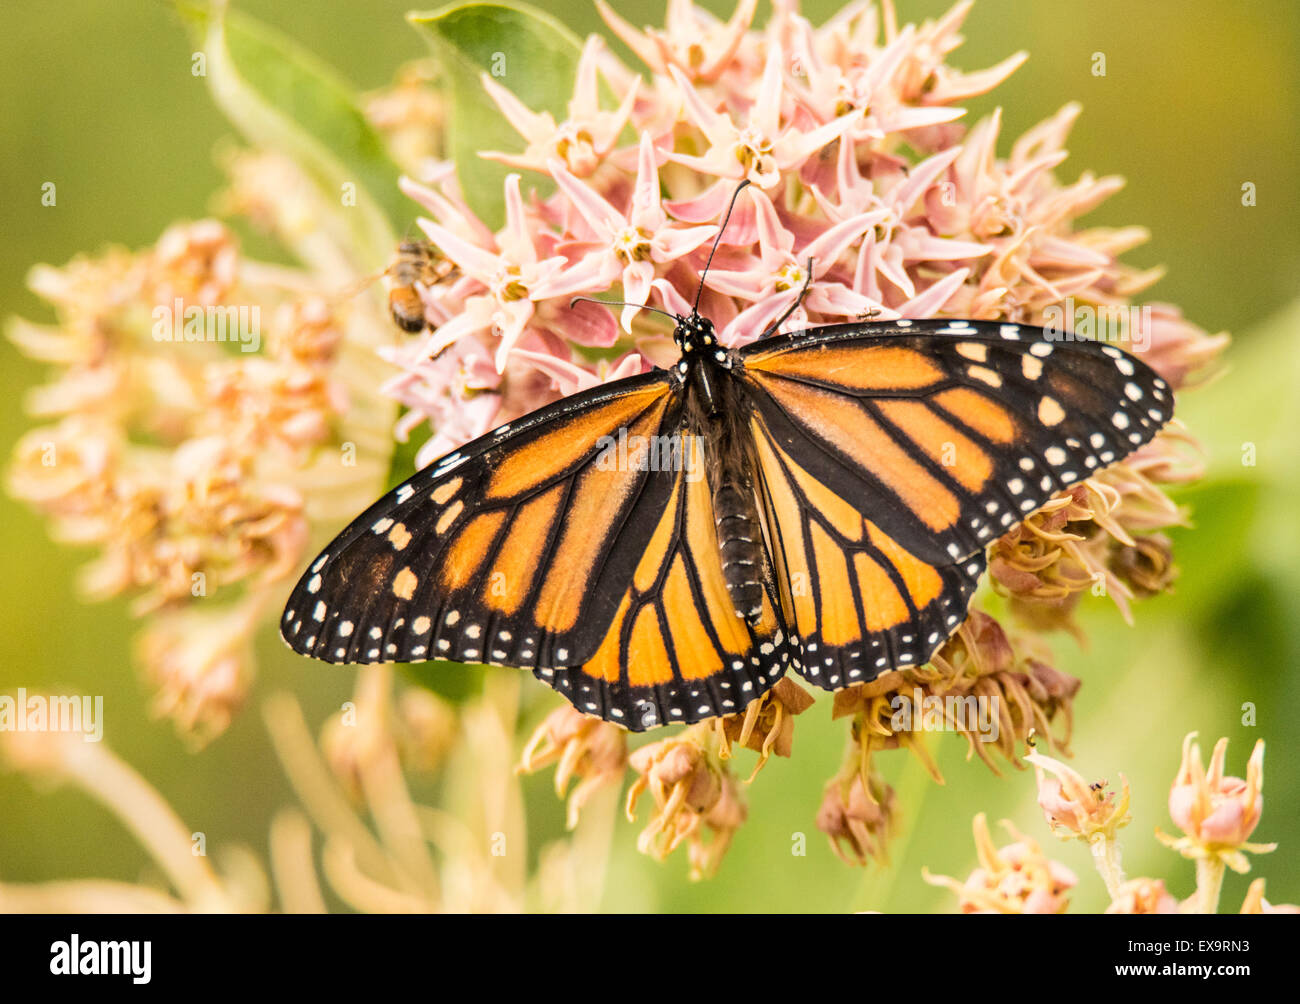 Butterflies, Endangered Monarch Butterfly sipping nector from Blooming Common Milweed Plant. Idaho, USA Stock Photo